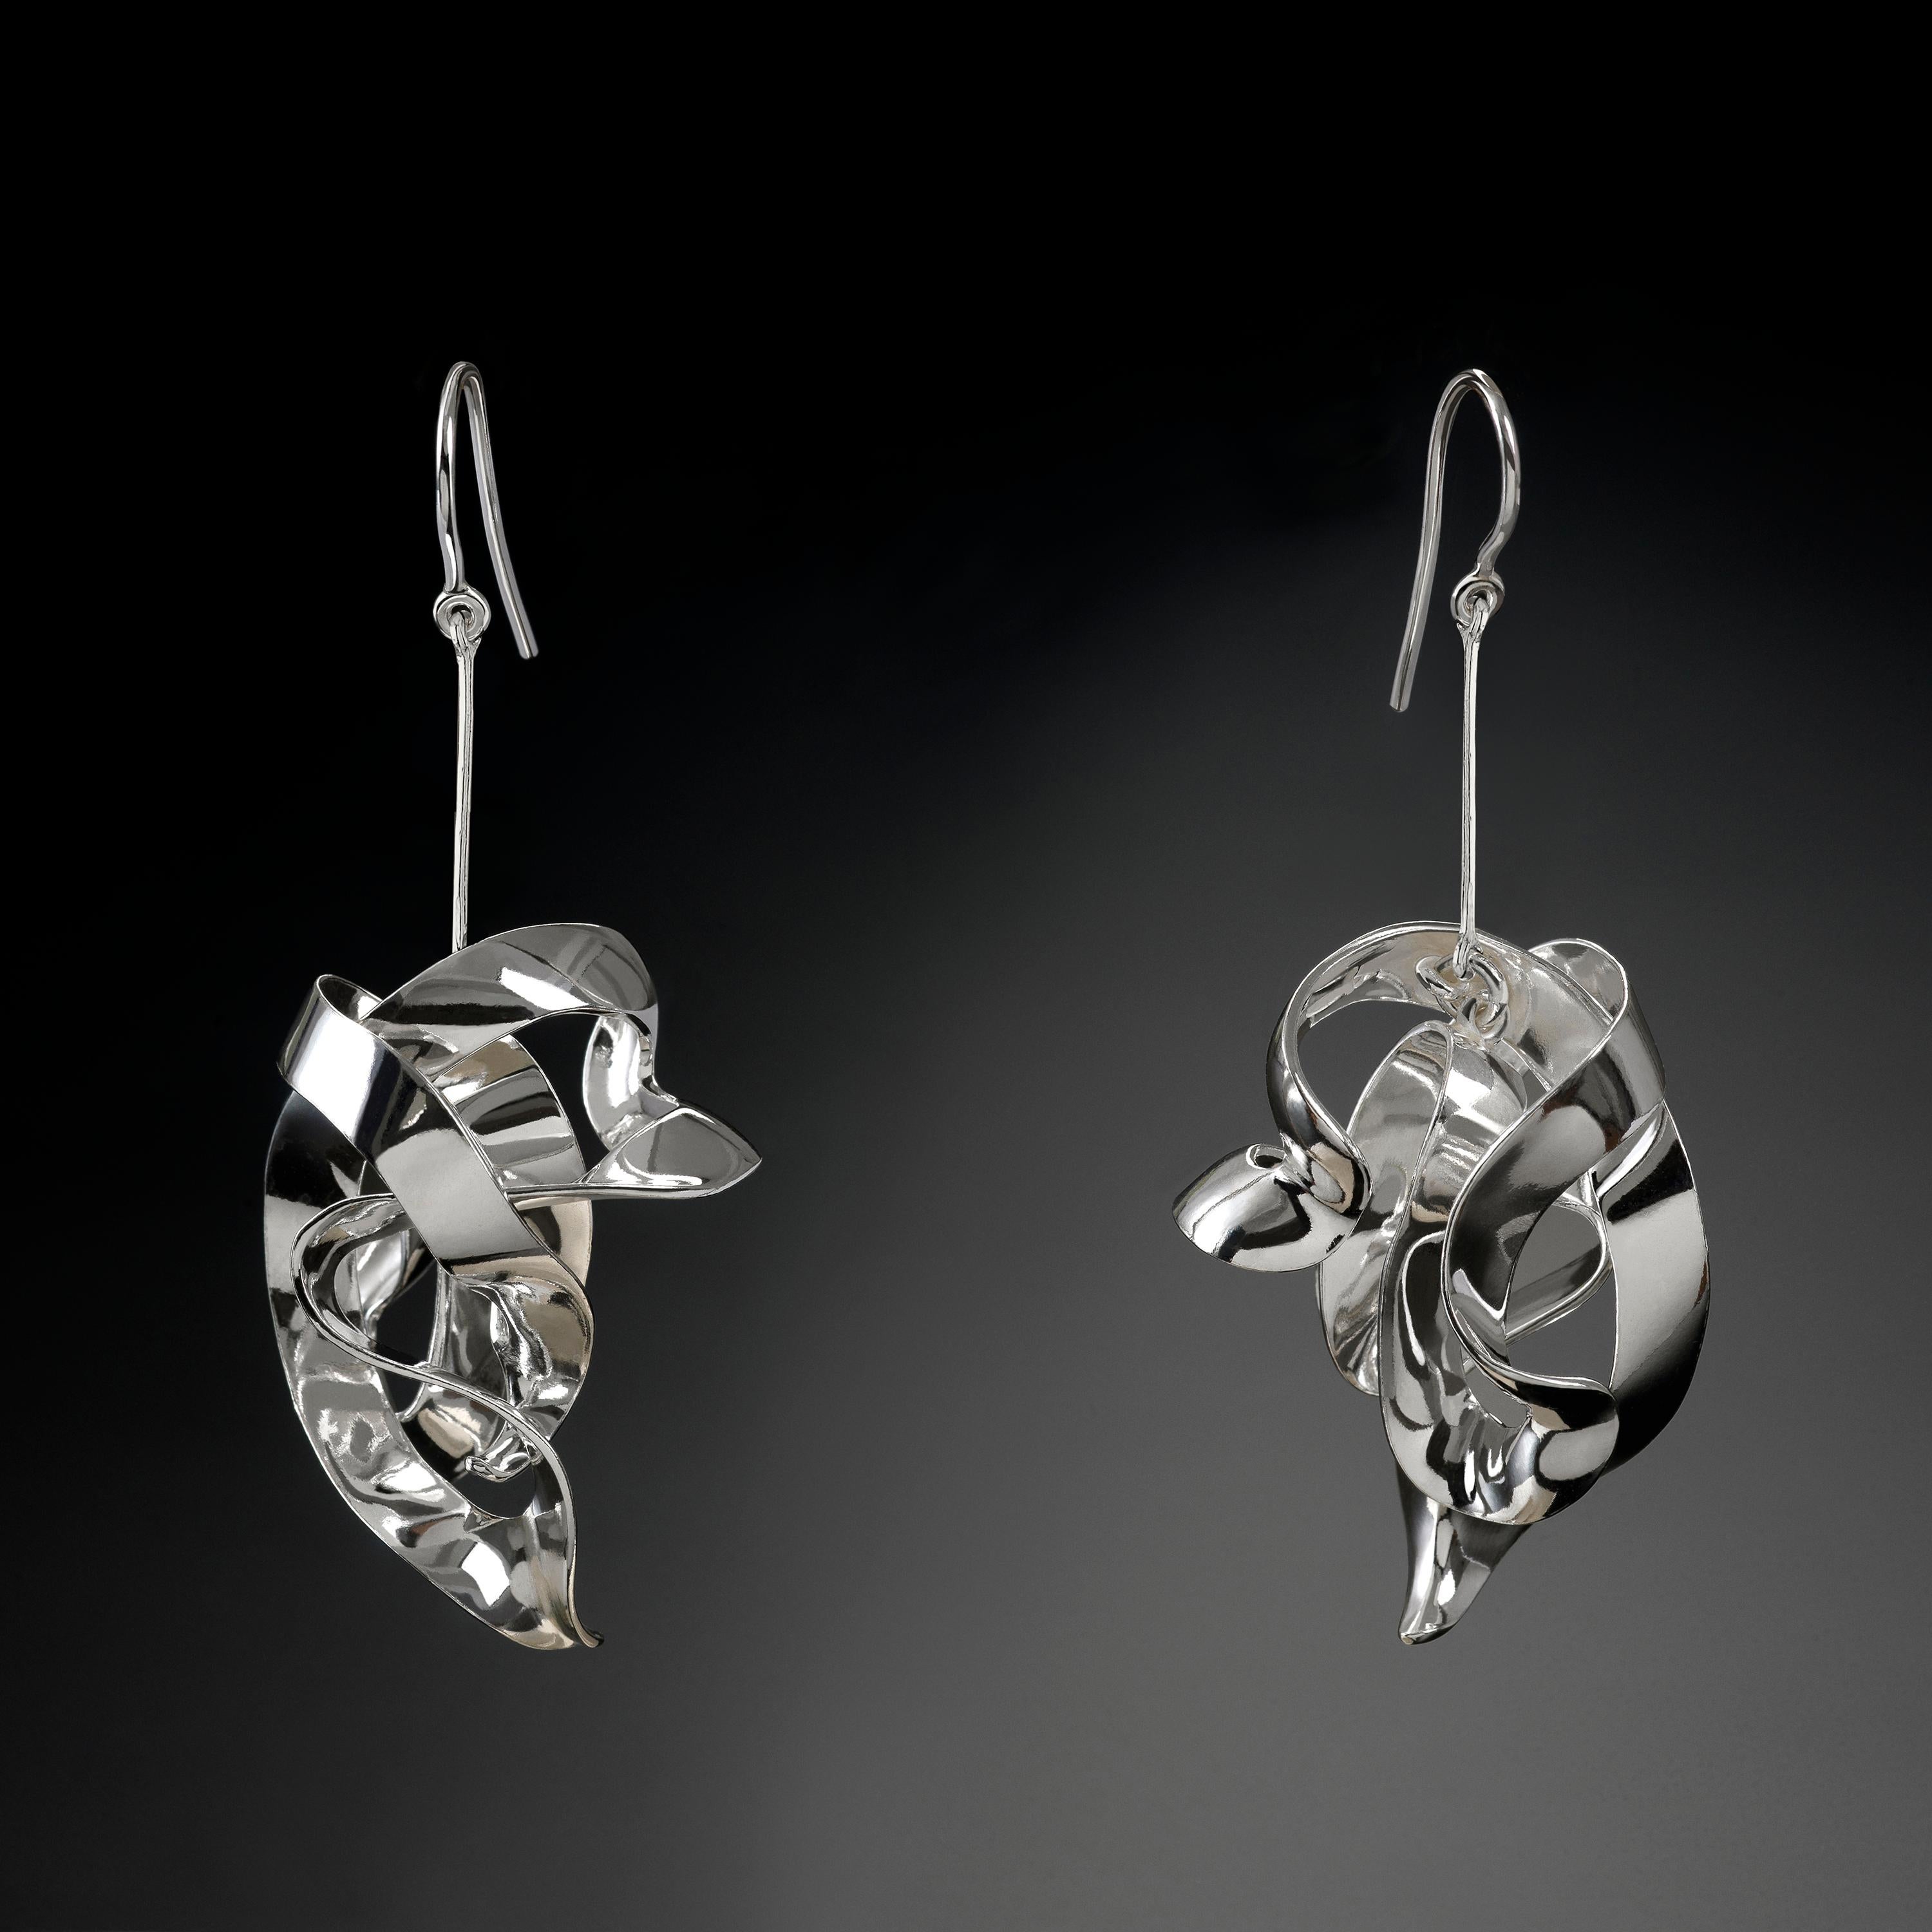 With their delicate, curved, free-form surfaces, the elements of these contemporary jewel-sculptures fold and unfold with harmony and grace like shell fragments or metallised leaves. Intertwined cleverly, the undulating sterling silver pieces dangle